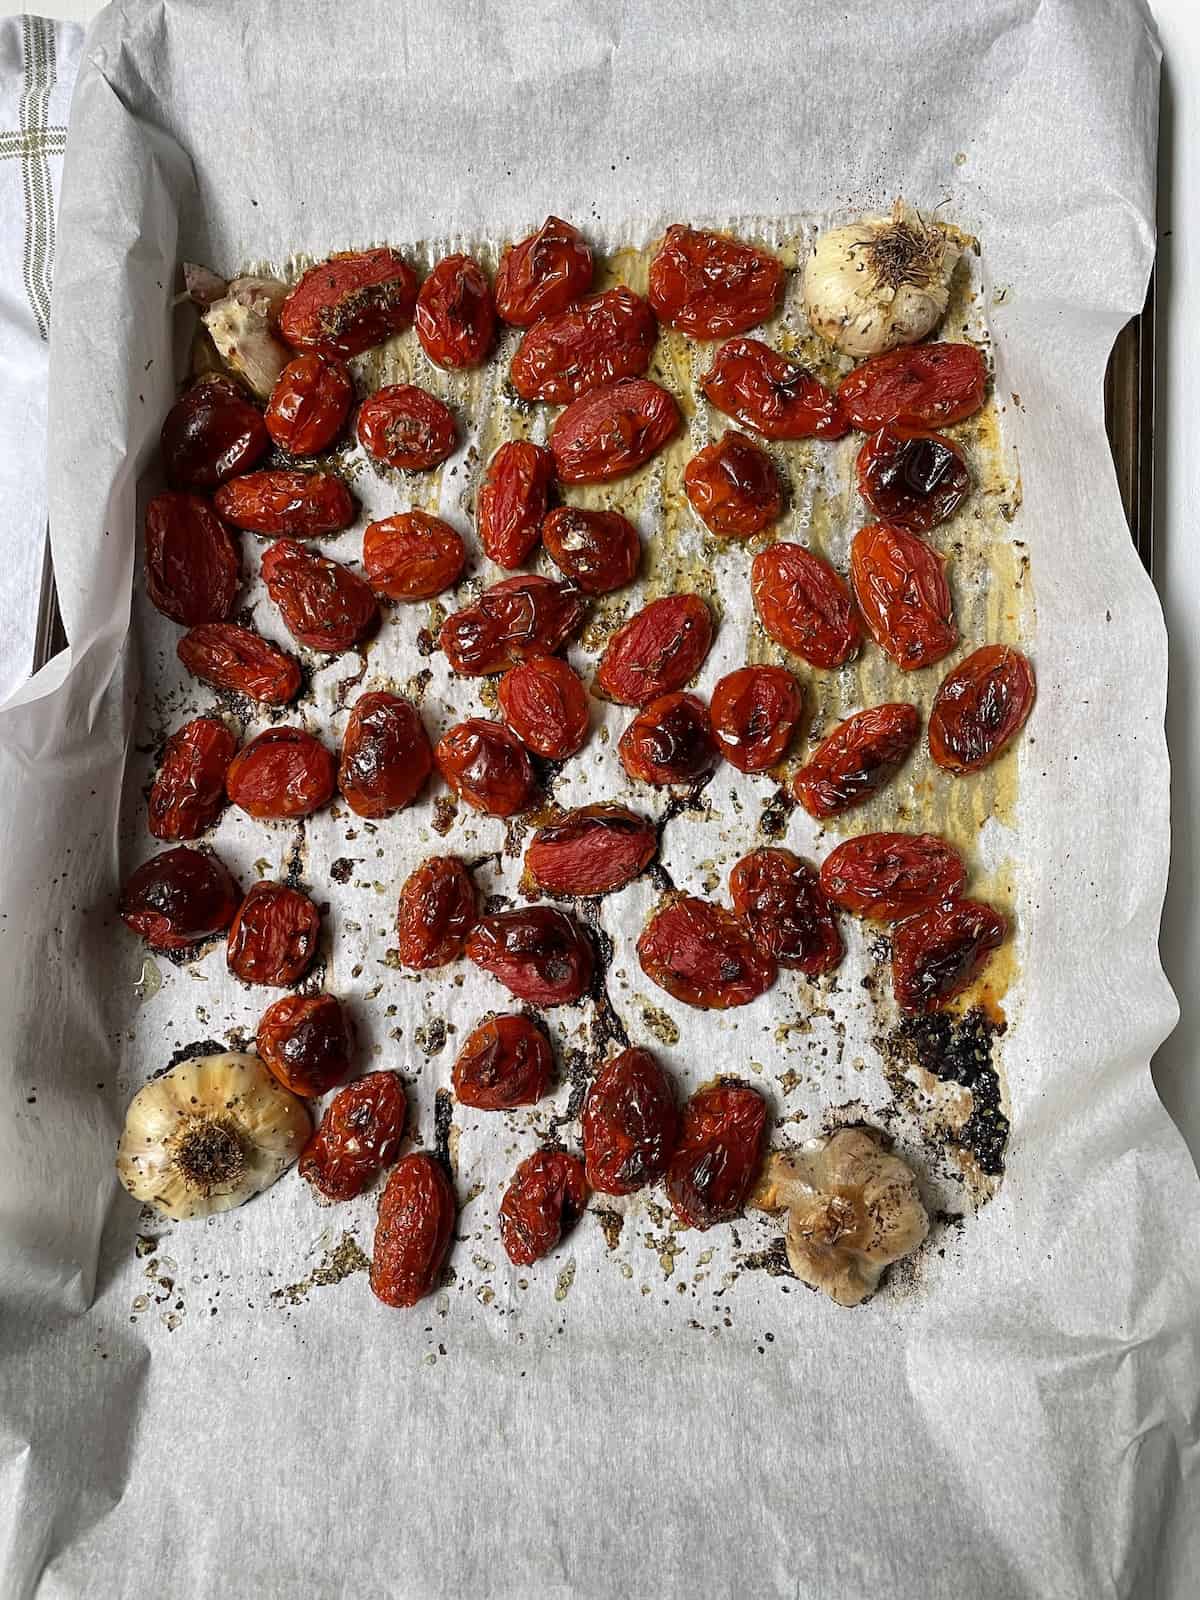 Grape tomatoes and garlic cooked on parchment.